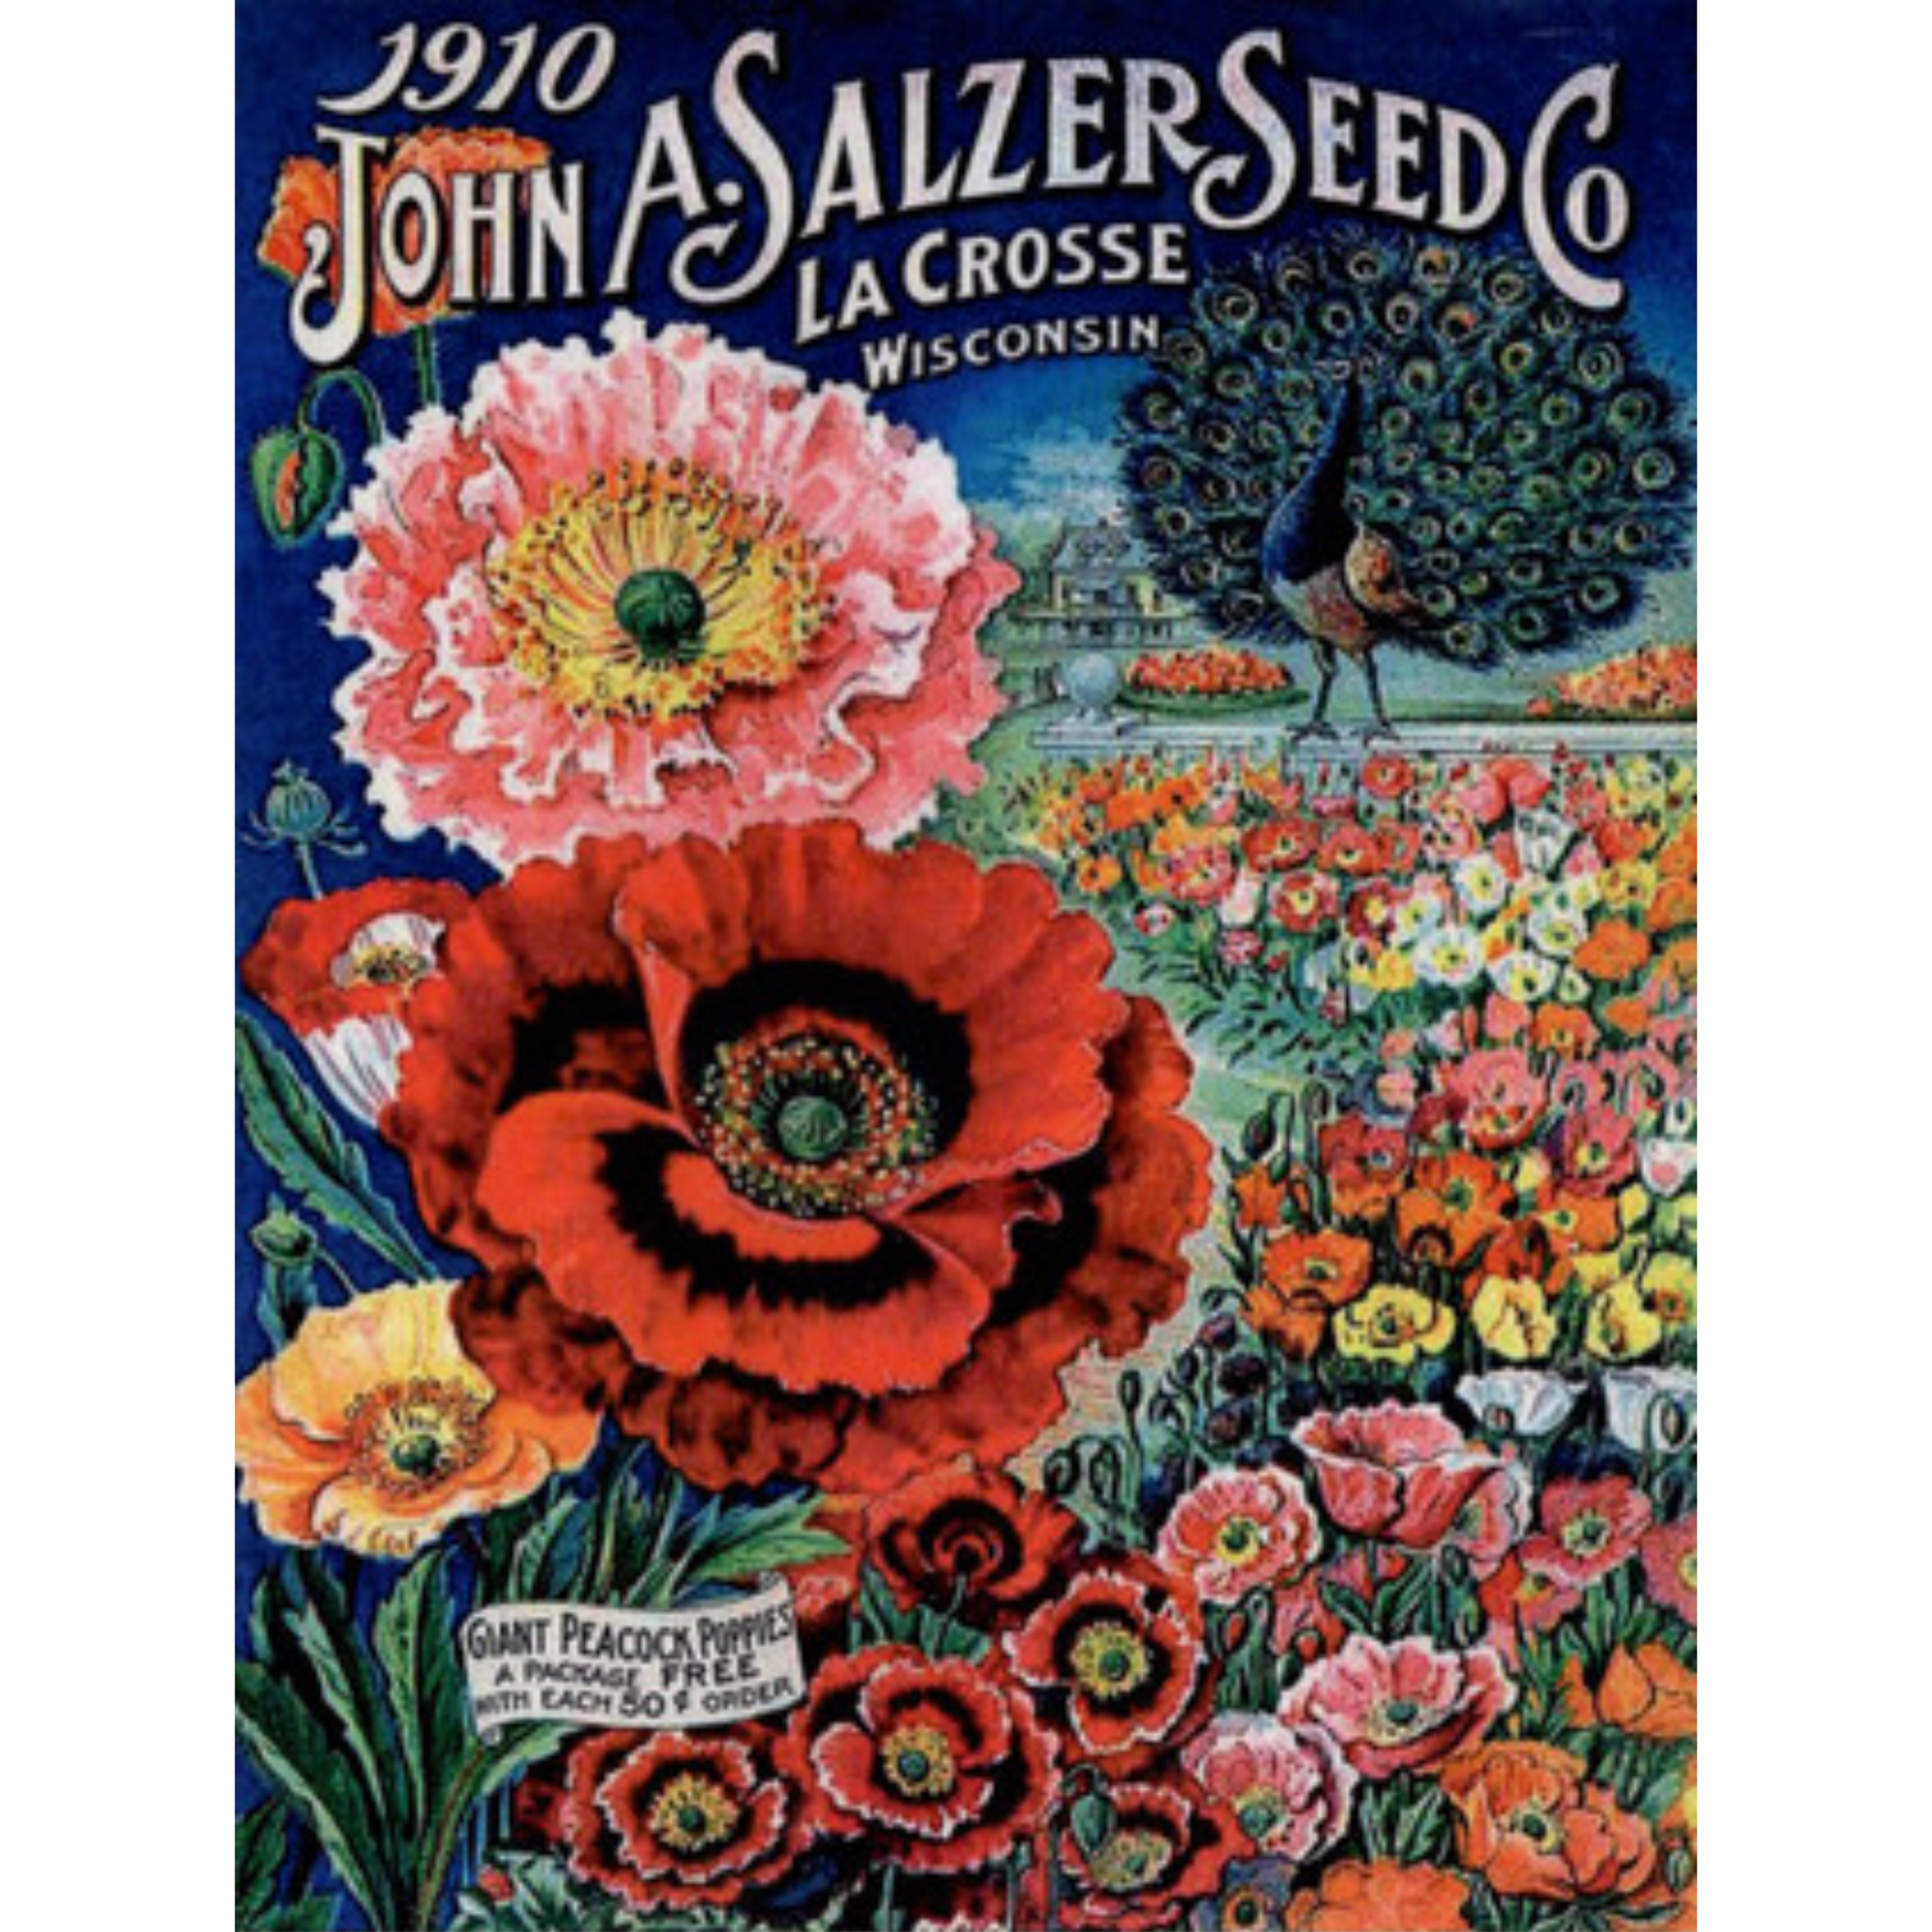 "John A. Salzer Seed Co.-Giant Peacock Poppies" TT103 decoupage rice paper by Calamabour. Size A4 available at Milton's Daughter.